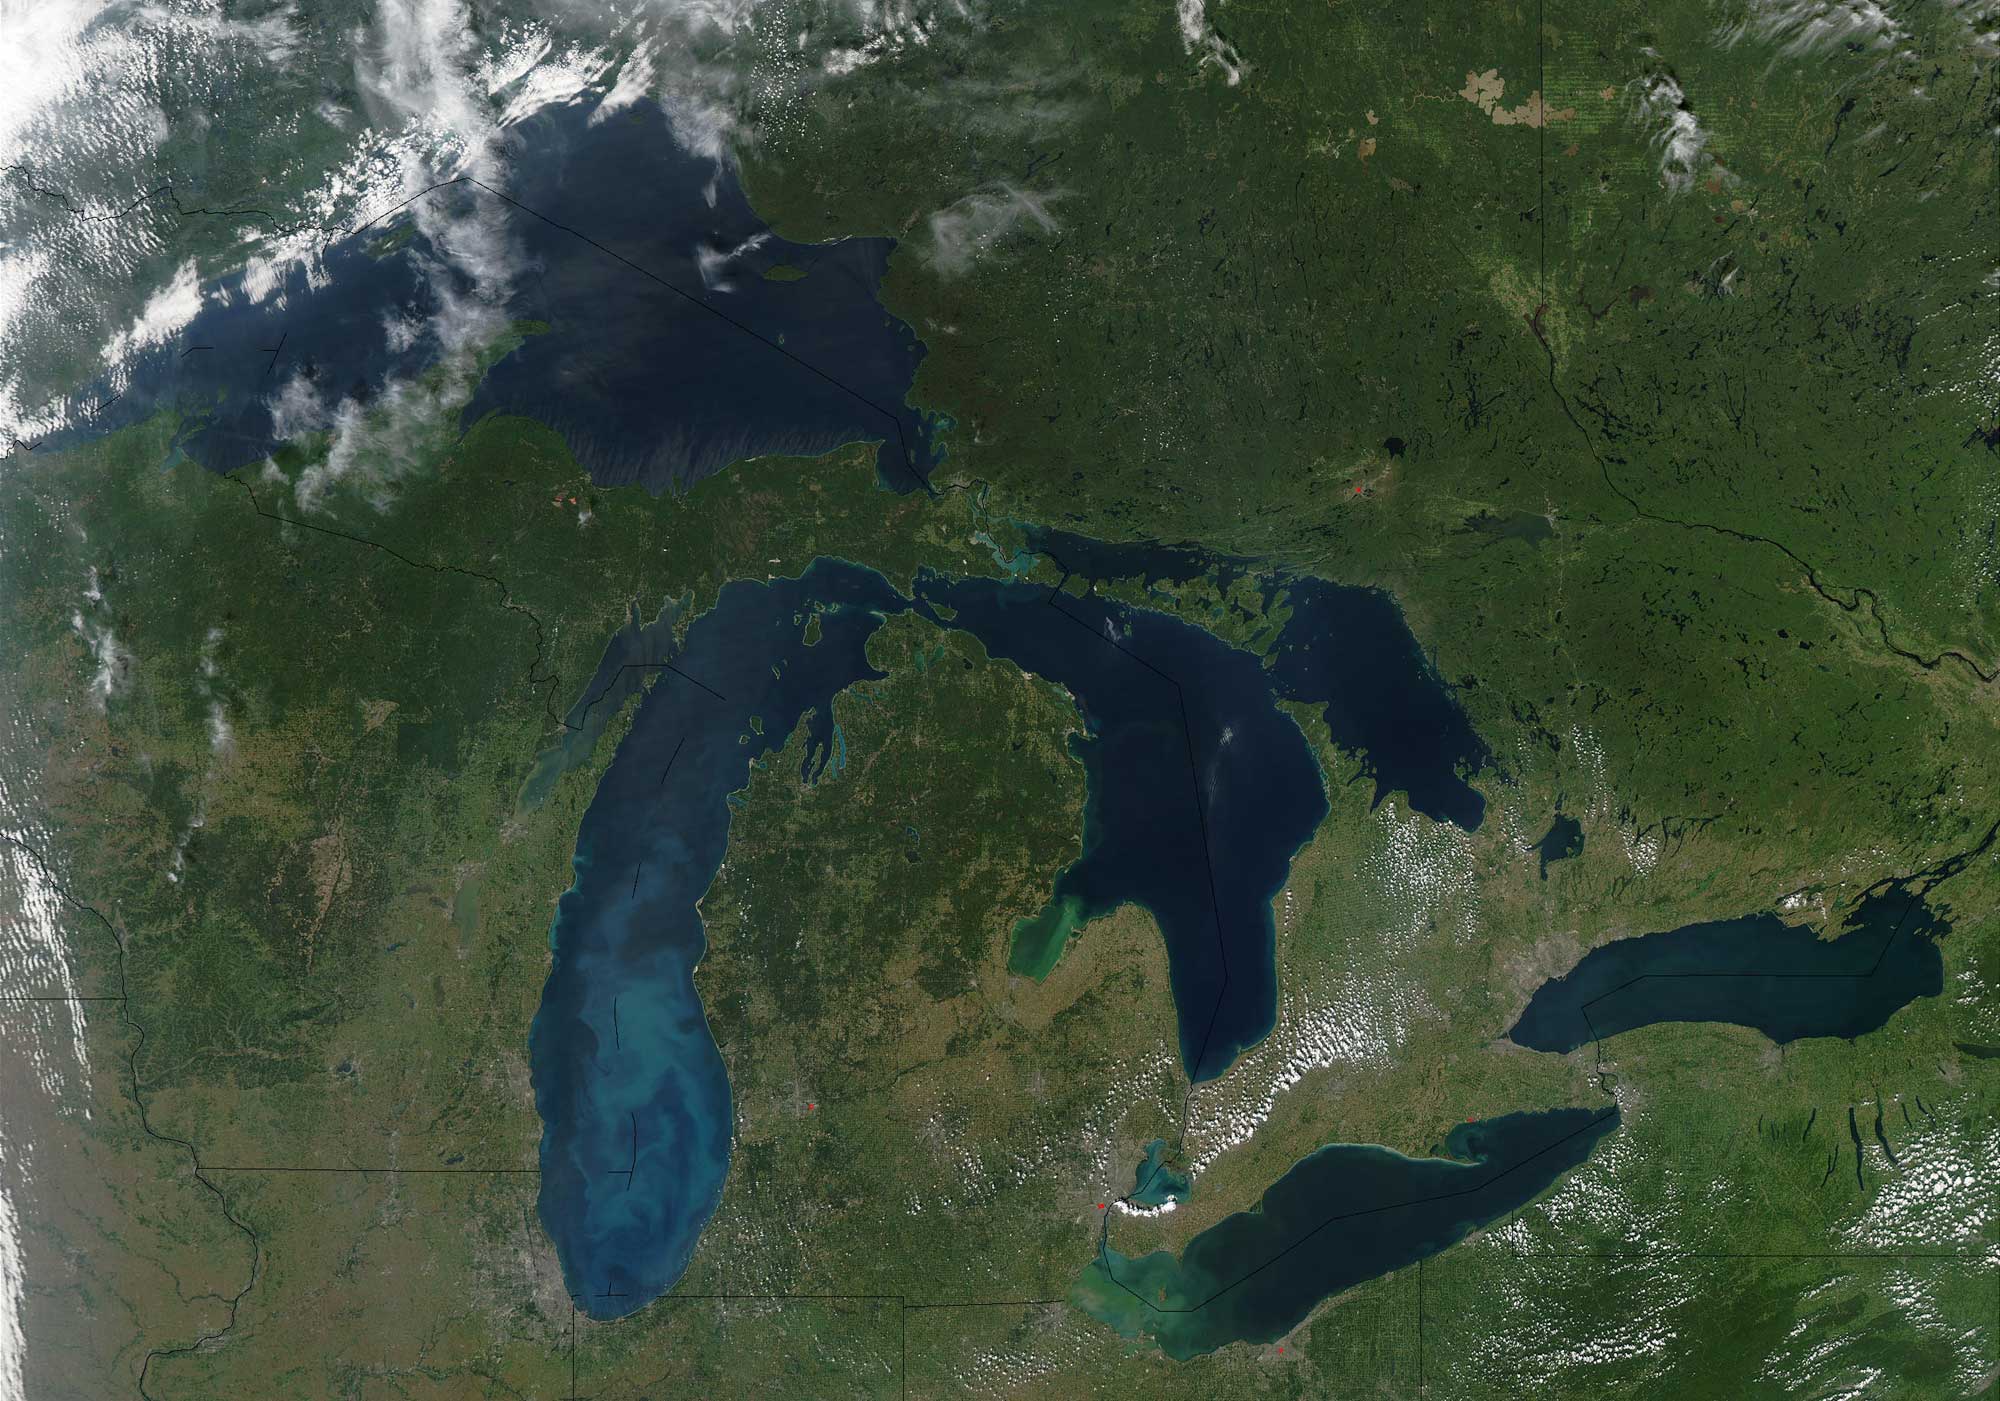 Satellite photograph of the Great Lakes in the midwestern and northeastern United States. The photo shows the five Great Lakes, from west to east, Superior, Michigan, Huron, Erie, and Ontario. The lakes are dark blue and surrounded by green landscape. The green generally becomes darker to the north, indicating more forest cover.